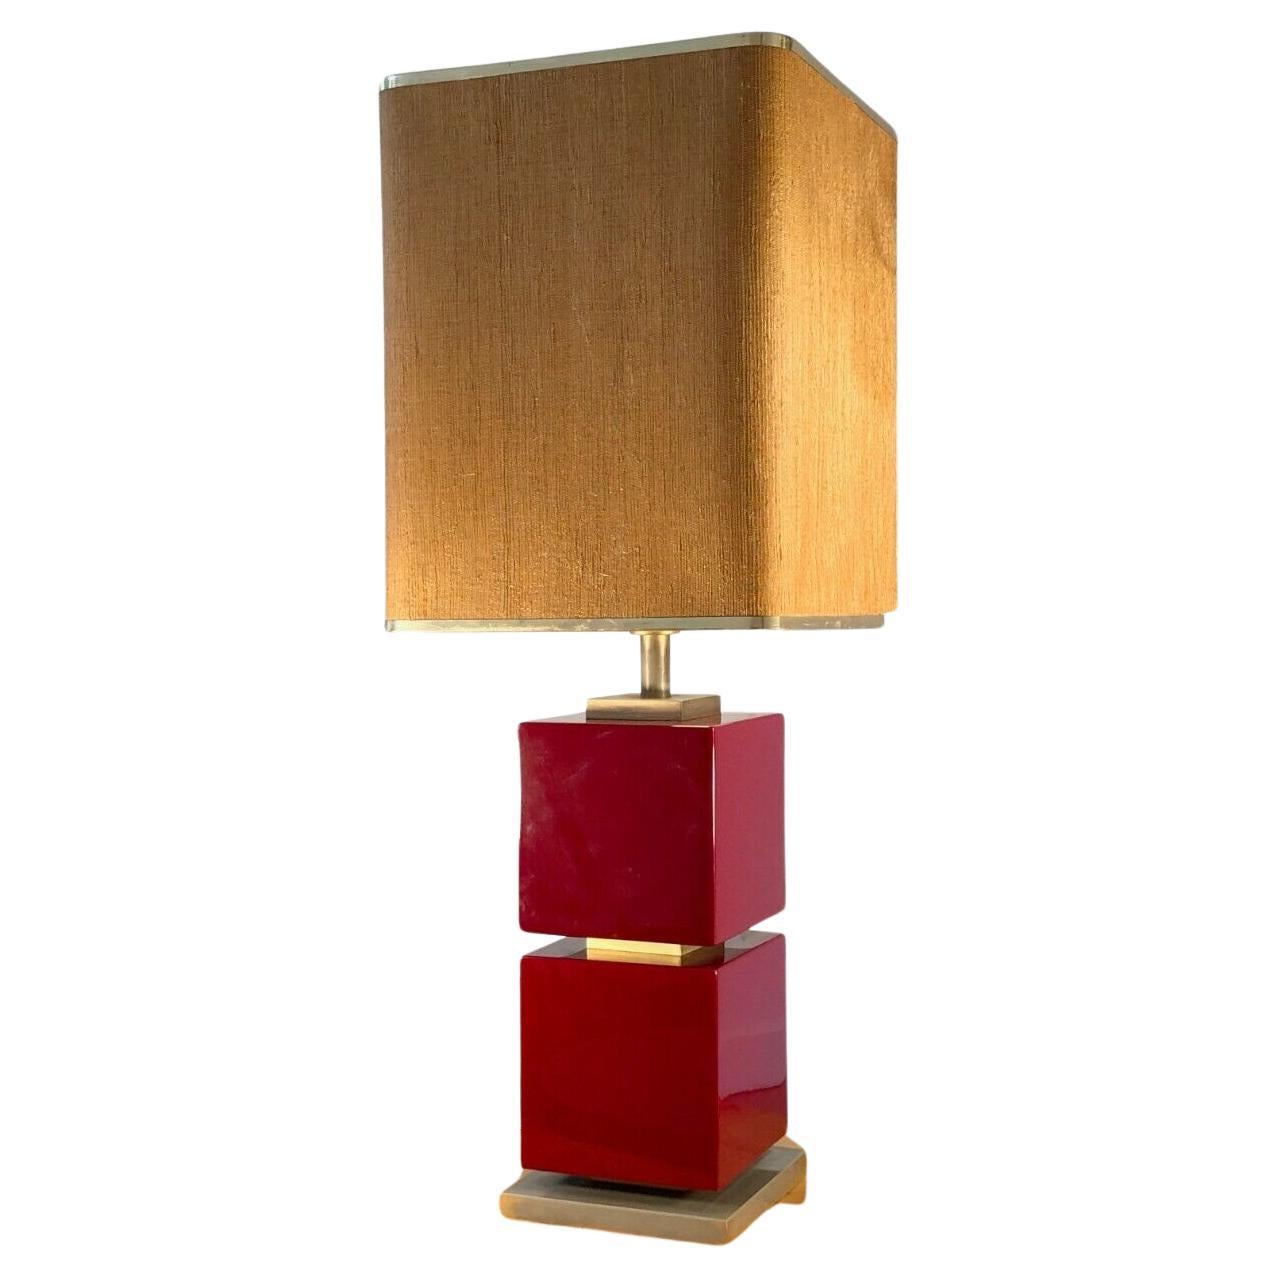 A BIG Red Lacquered SHABBY-CHIC POST-MODERN Geometric TABLE LAMP, France 1970